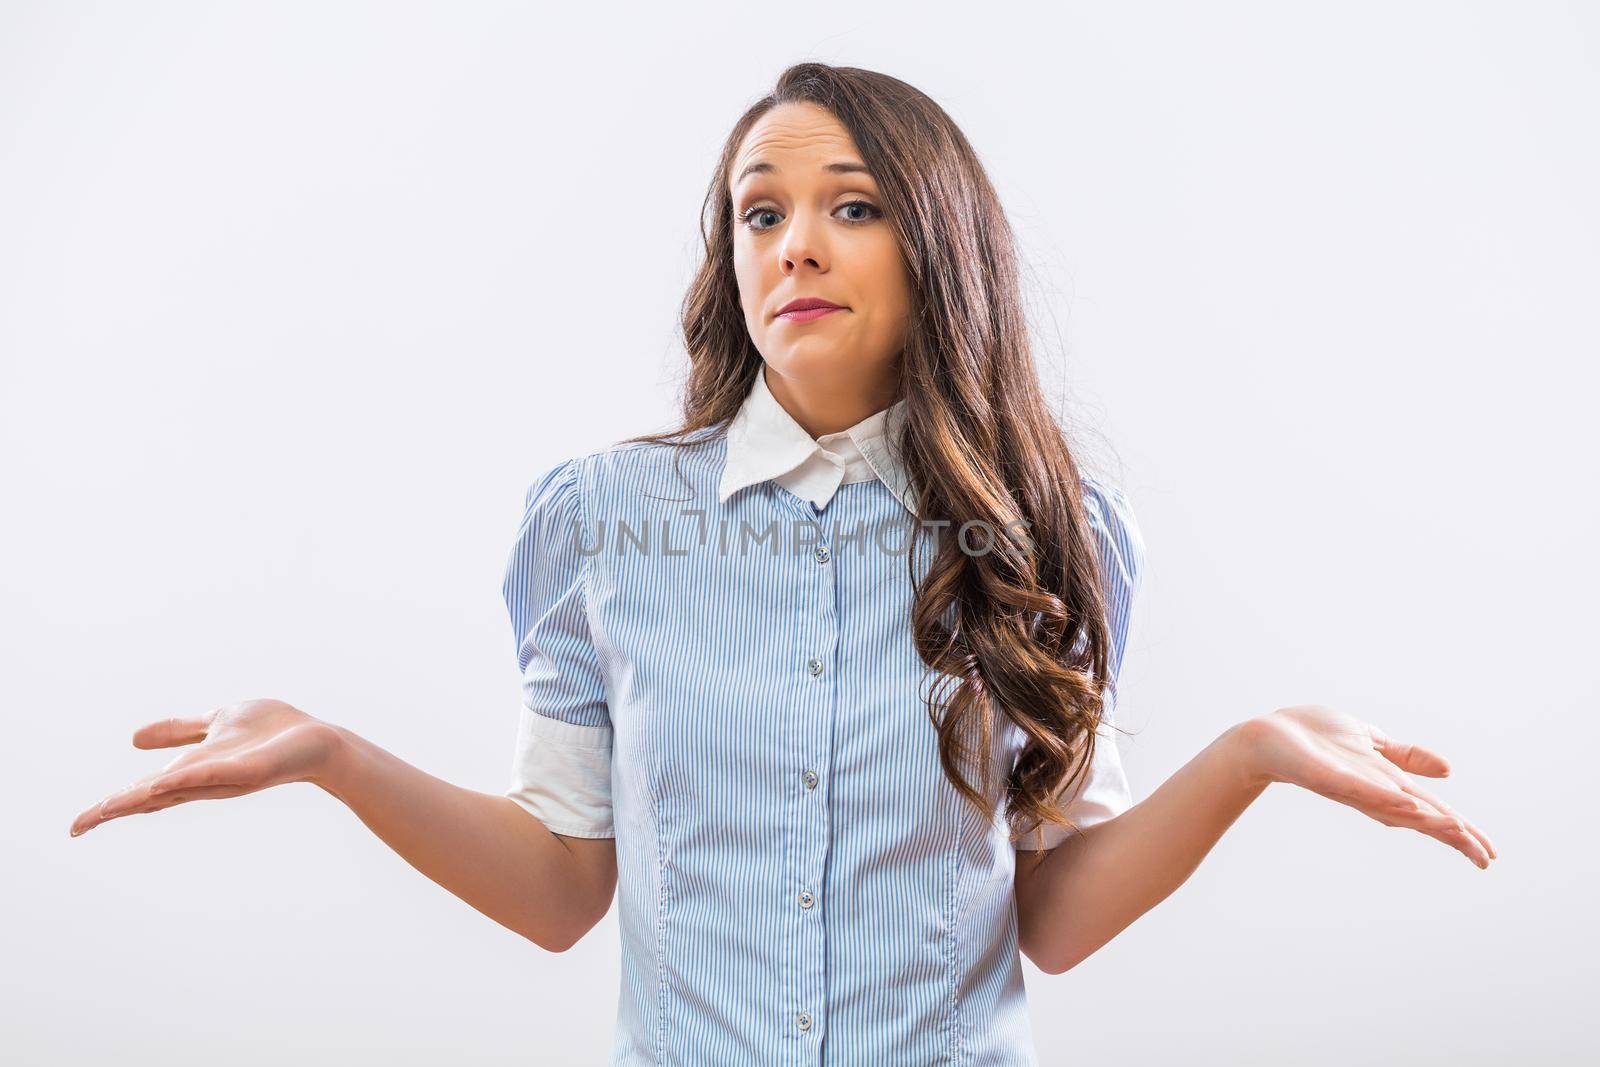 Image of confused businesswoman shrugging on gray background.